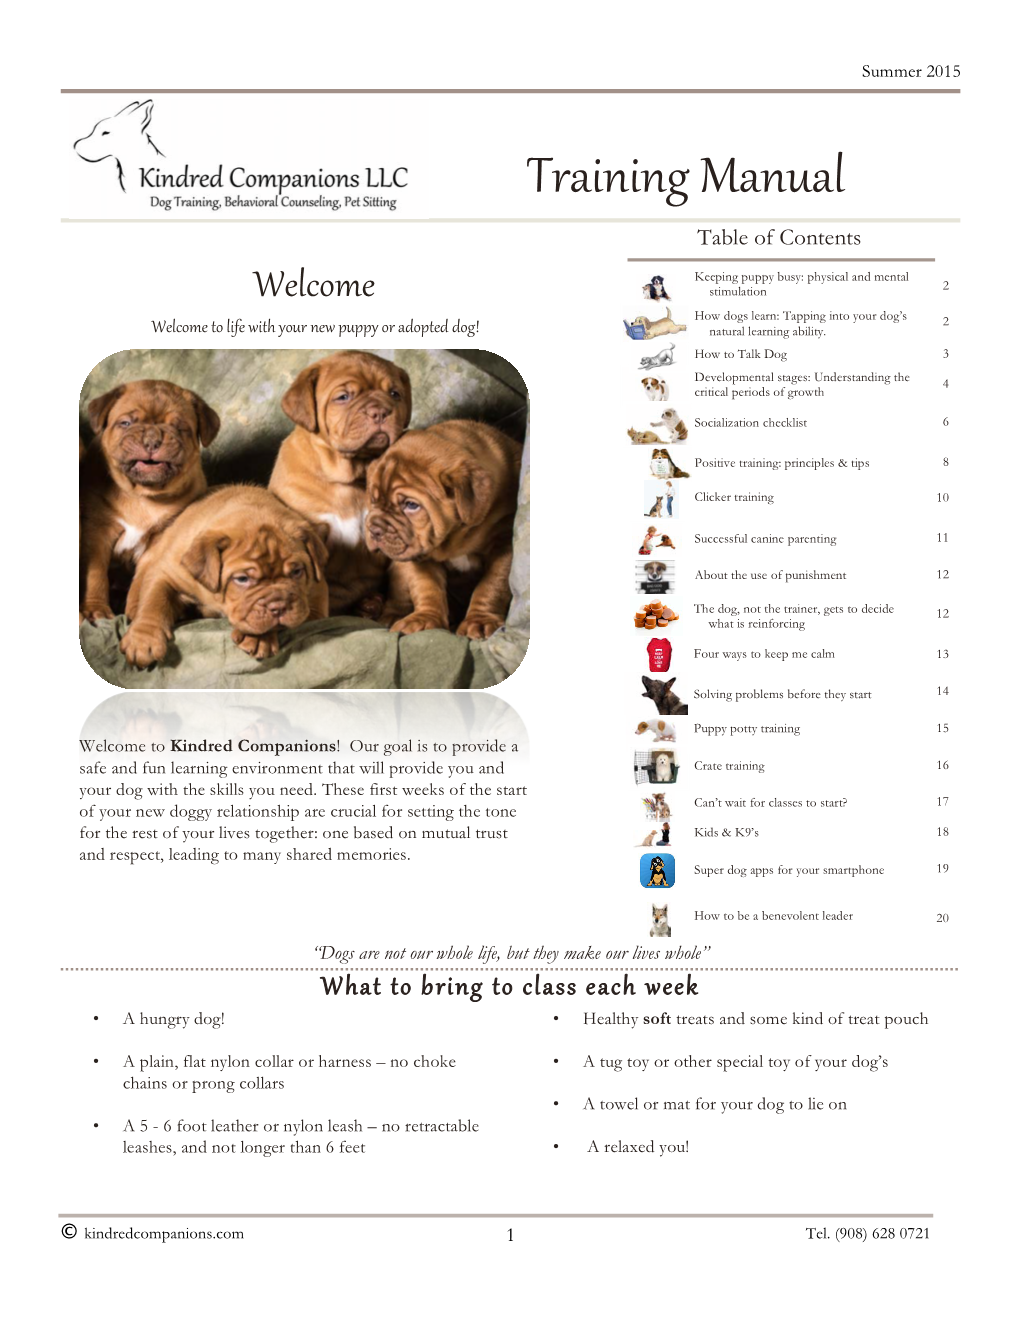 Training Manual Table of Contents